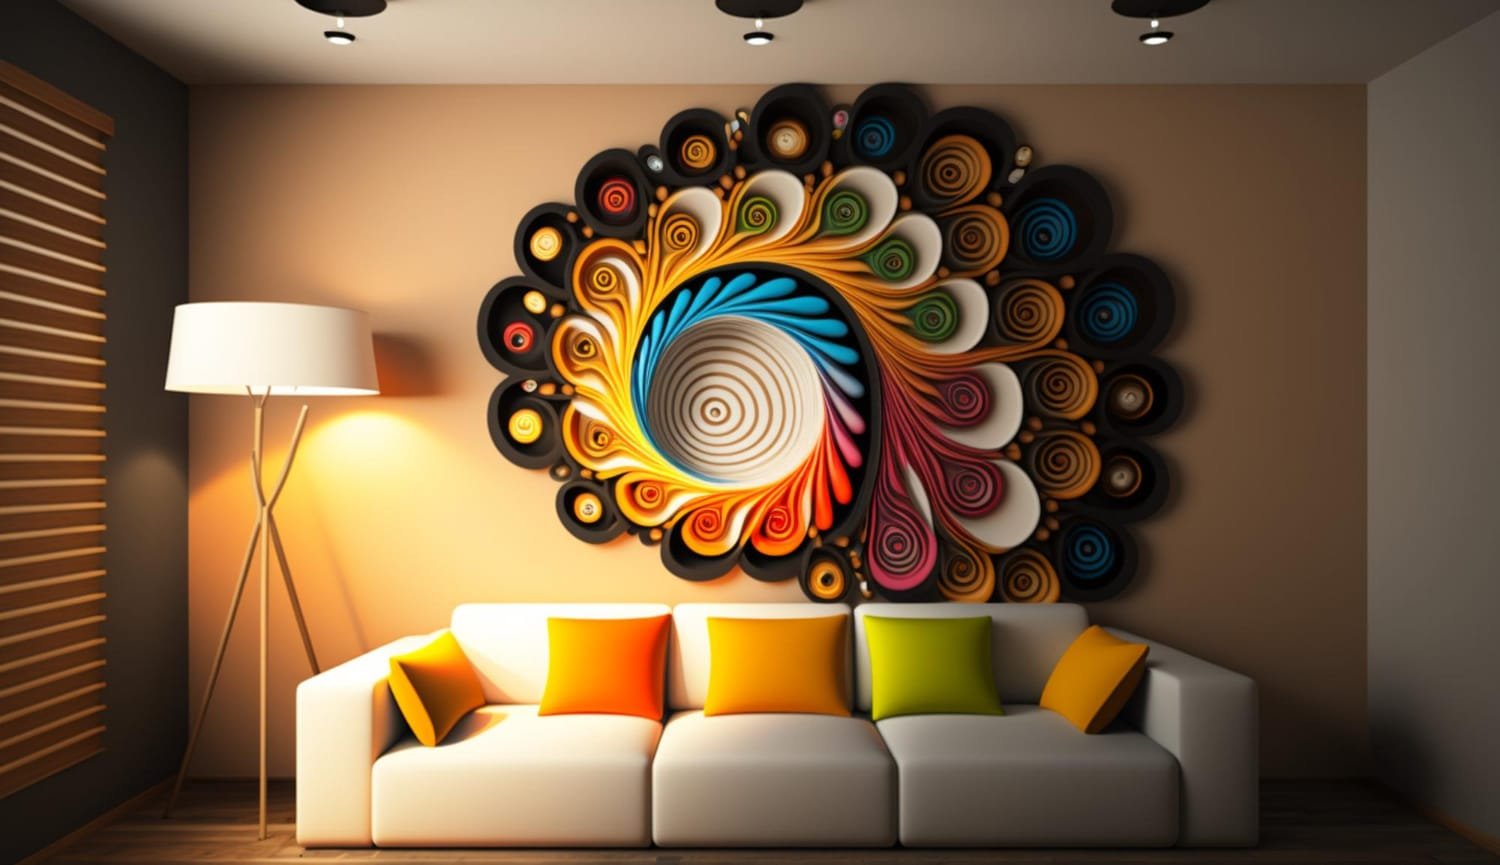 Decorate Your Home Beautifully With World of Wallpaper’s Stylish Wallpaper Designs